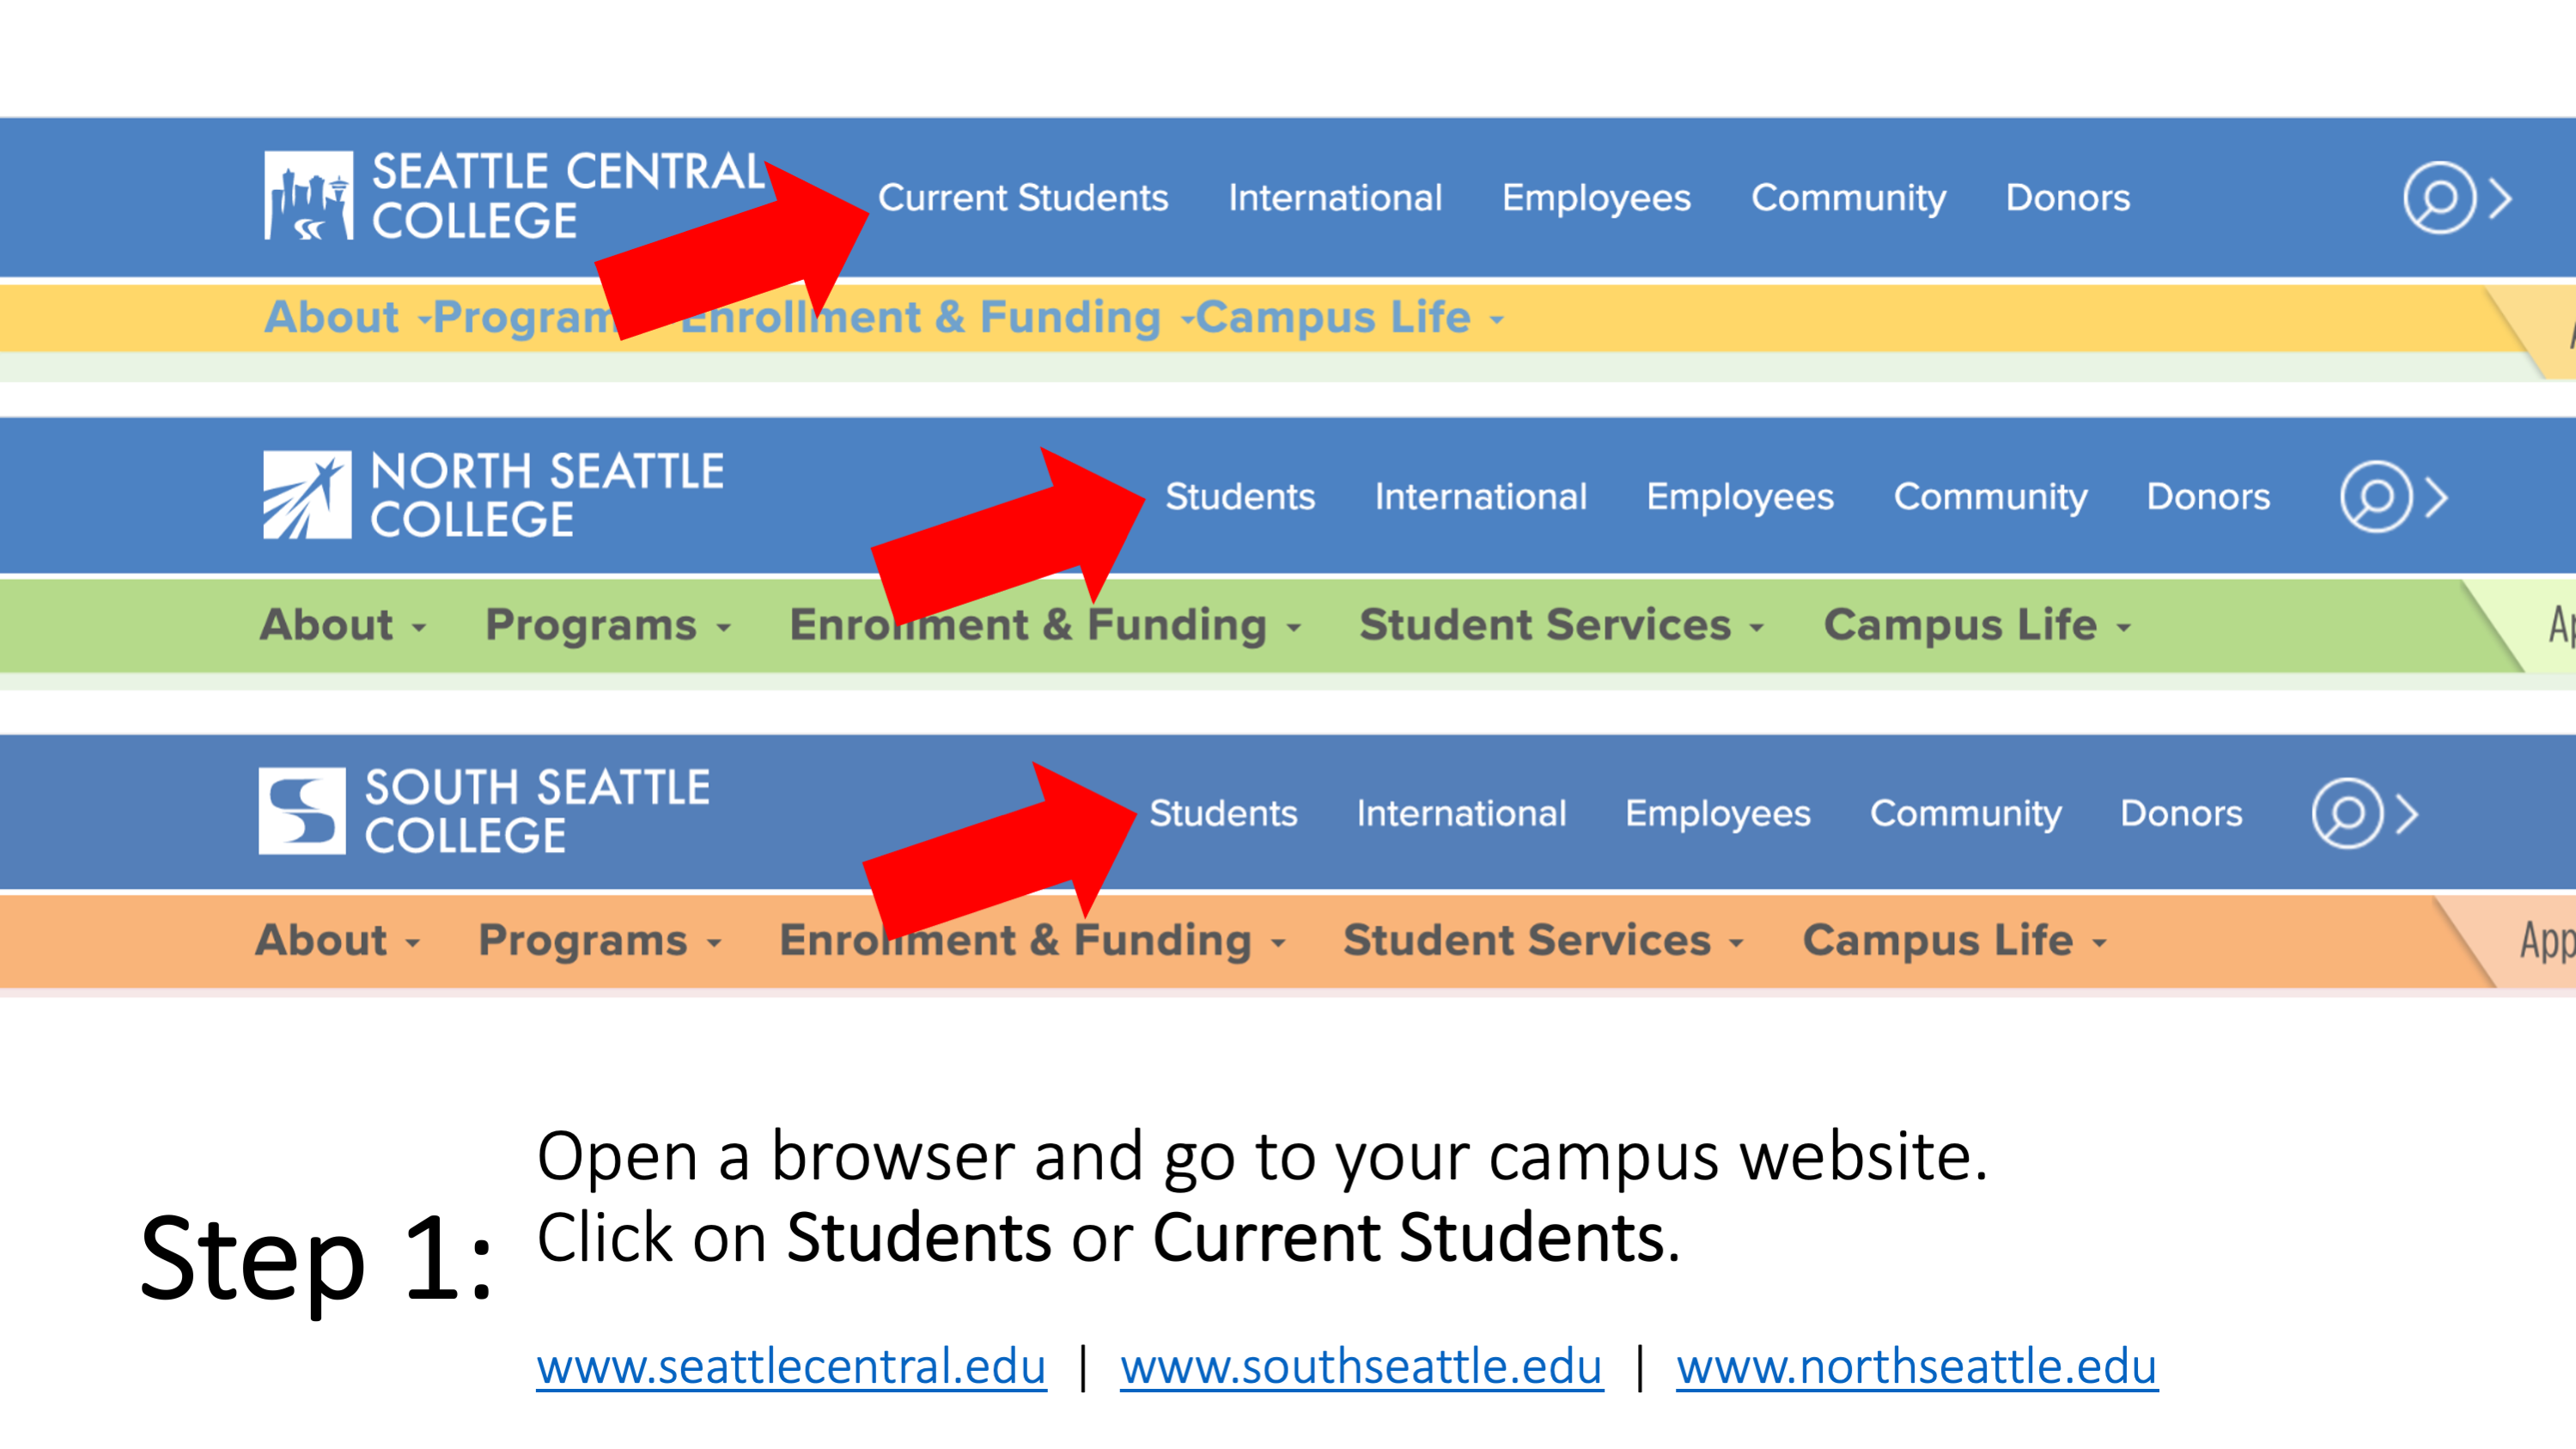 Step 1: Open a browser and go to your campus website. Click on Students or Current Students.www.seattlecentral.edu , www.southseattle.edu , or www.northseattle.edu.